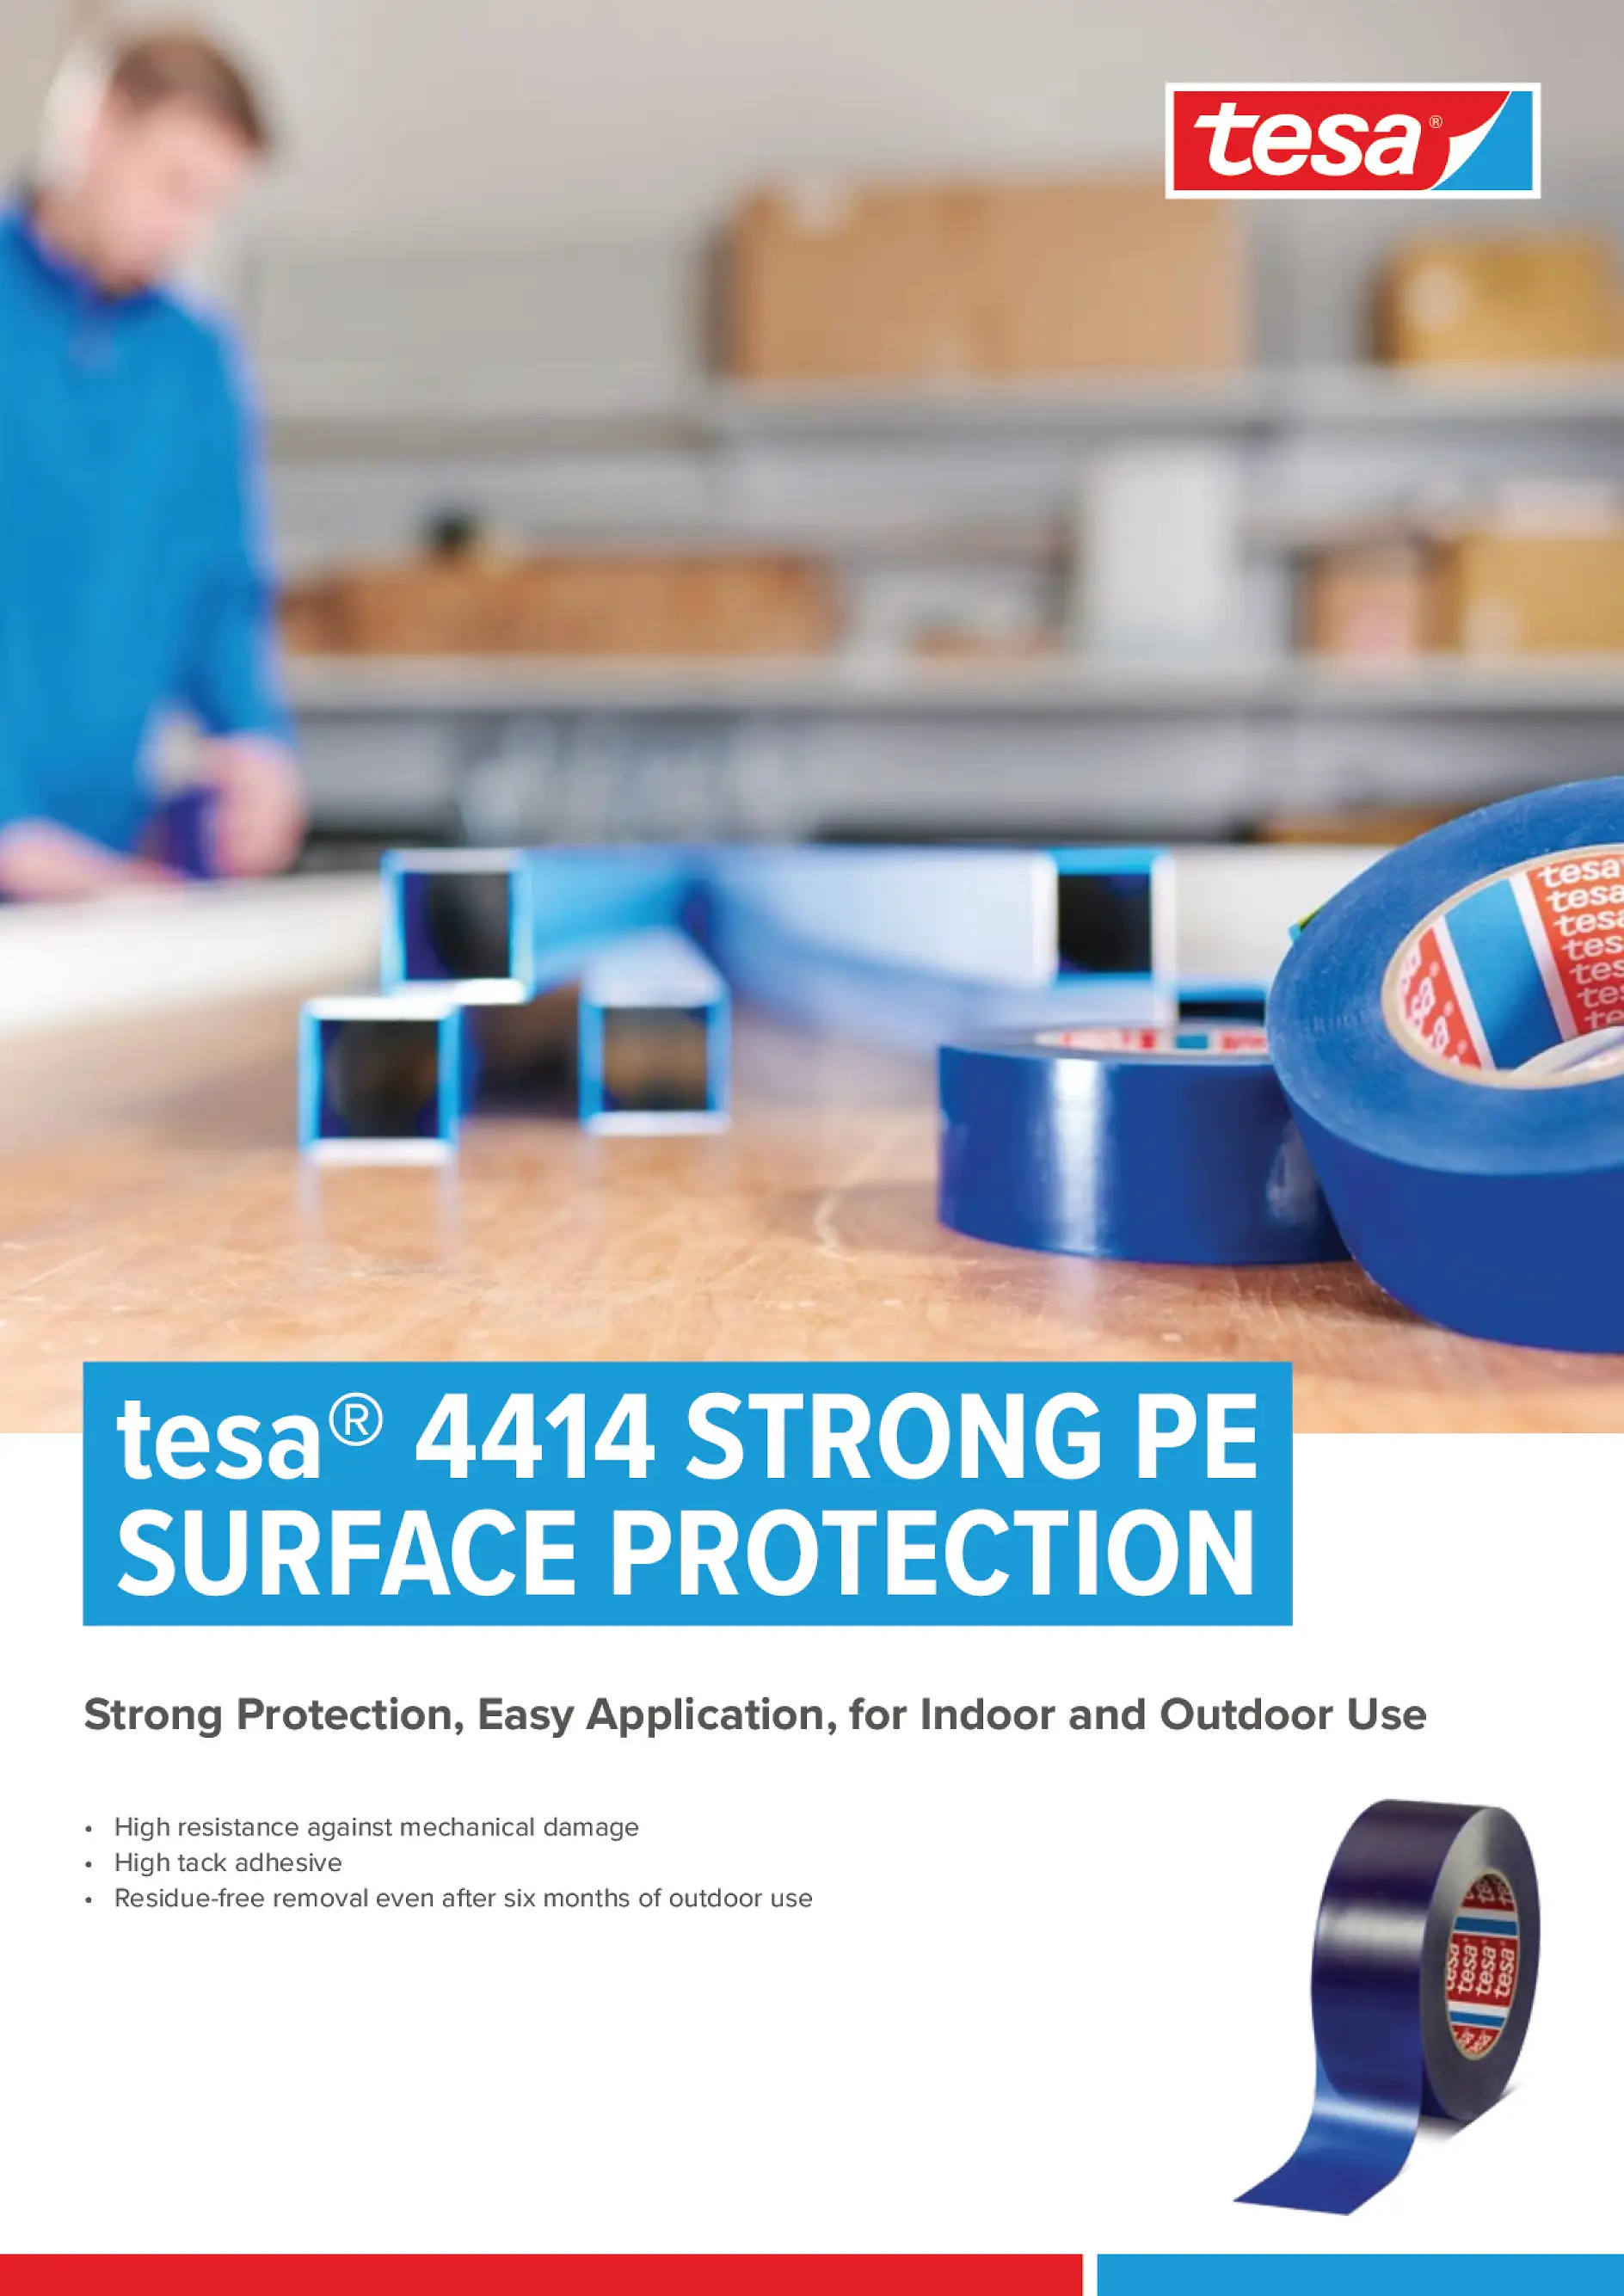 tesa® 4414 Robust PE Surface Protection Flyer